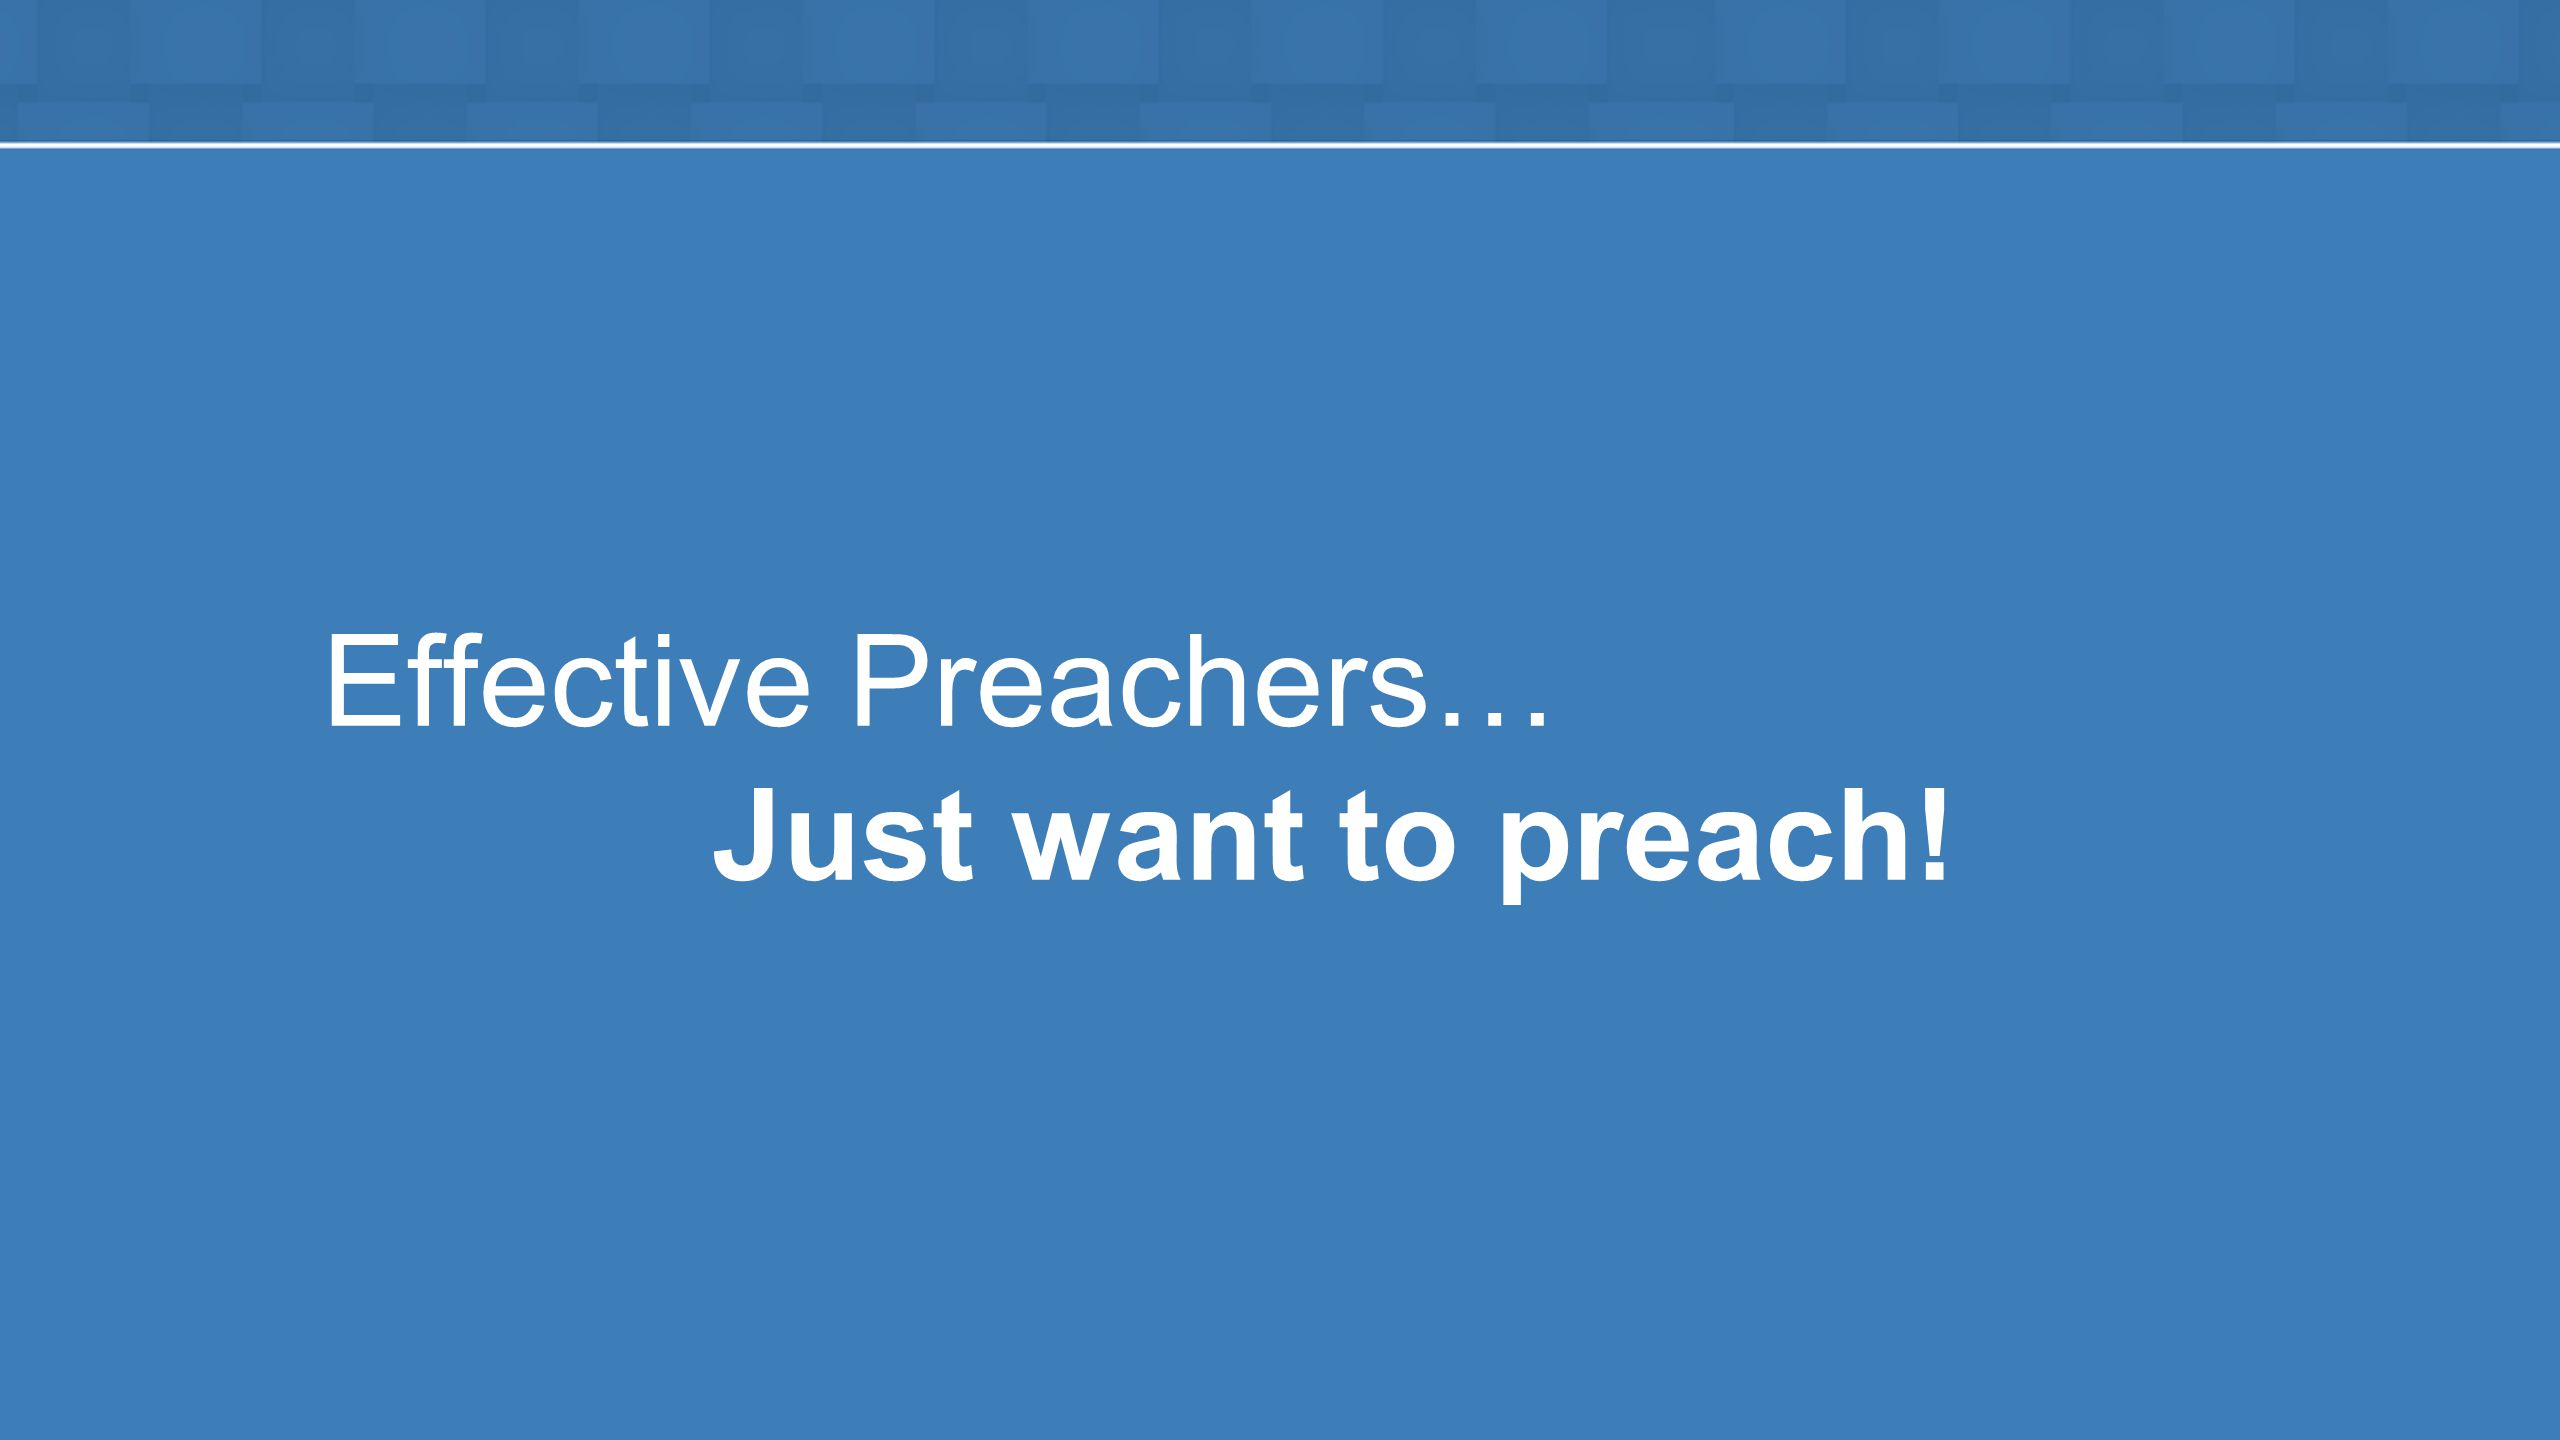 Effective Preachers… Just want to preach!